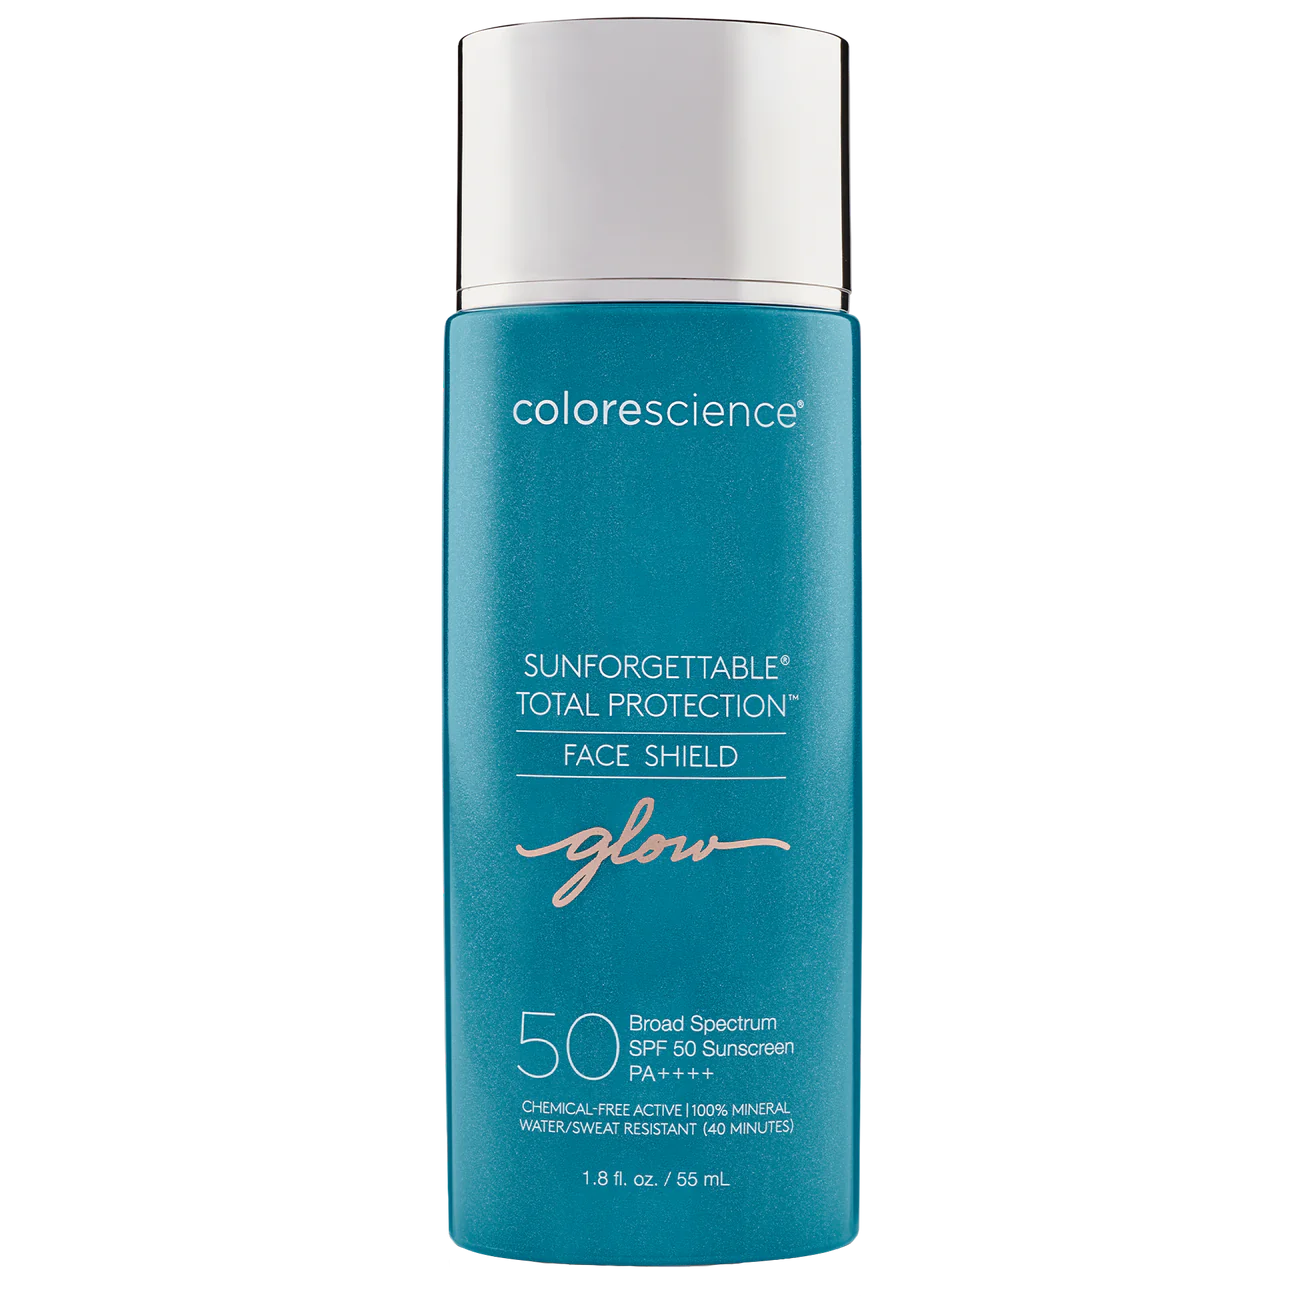 Colorescience Sunforgettable Total Protection Face Shield Glow SPF 50